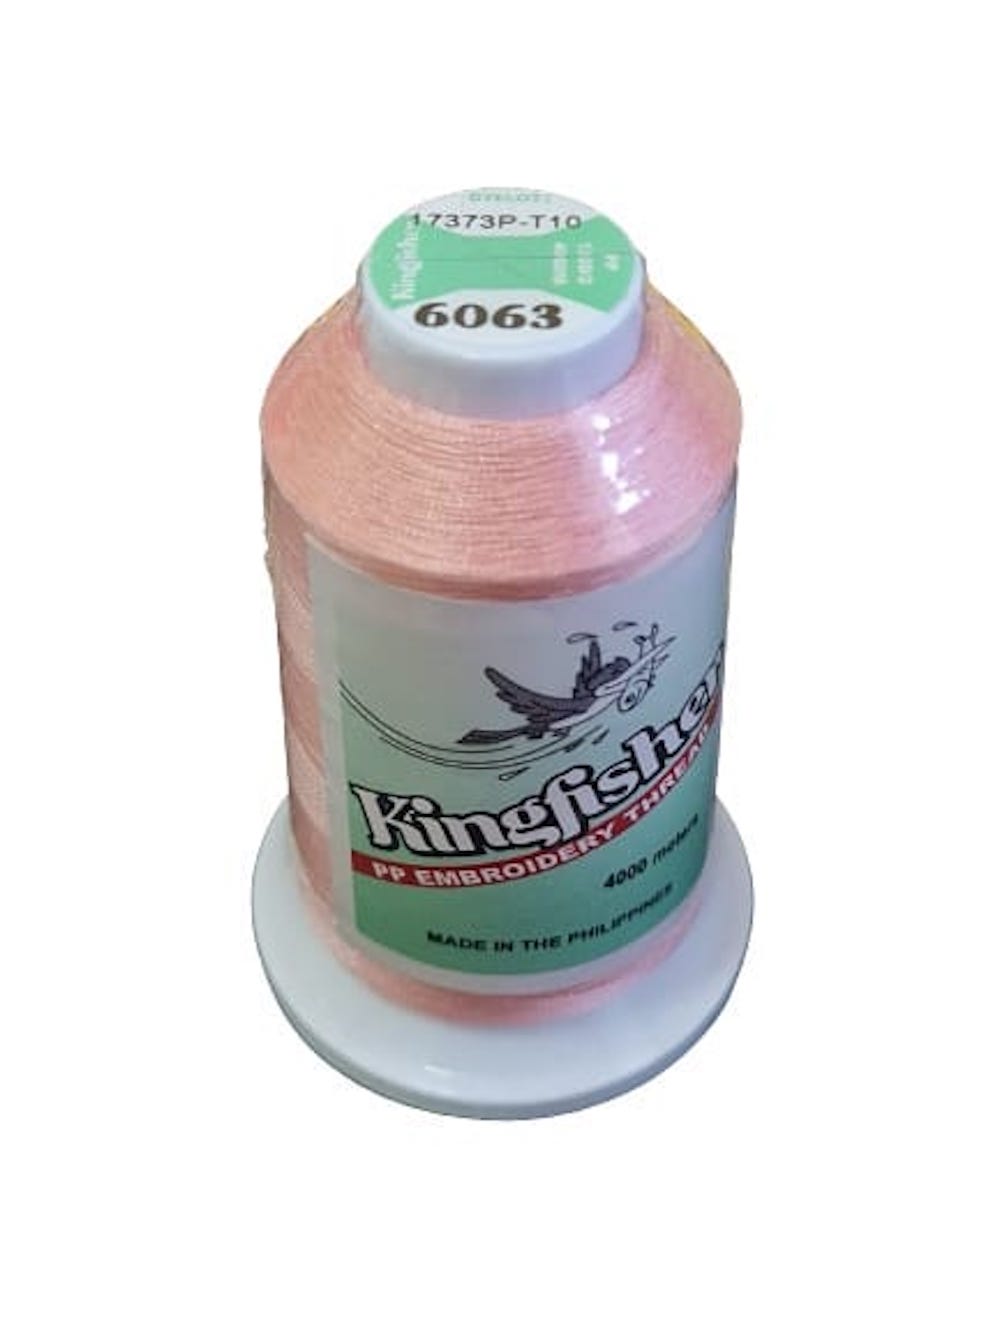 King Fisher Embroidery Thread 4000m 6063 - MY SEWING MALL